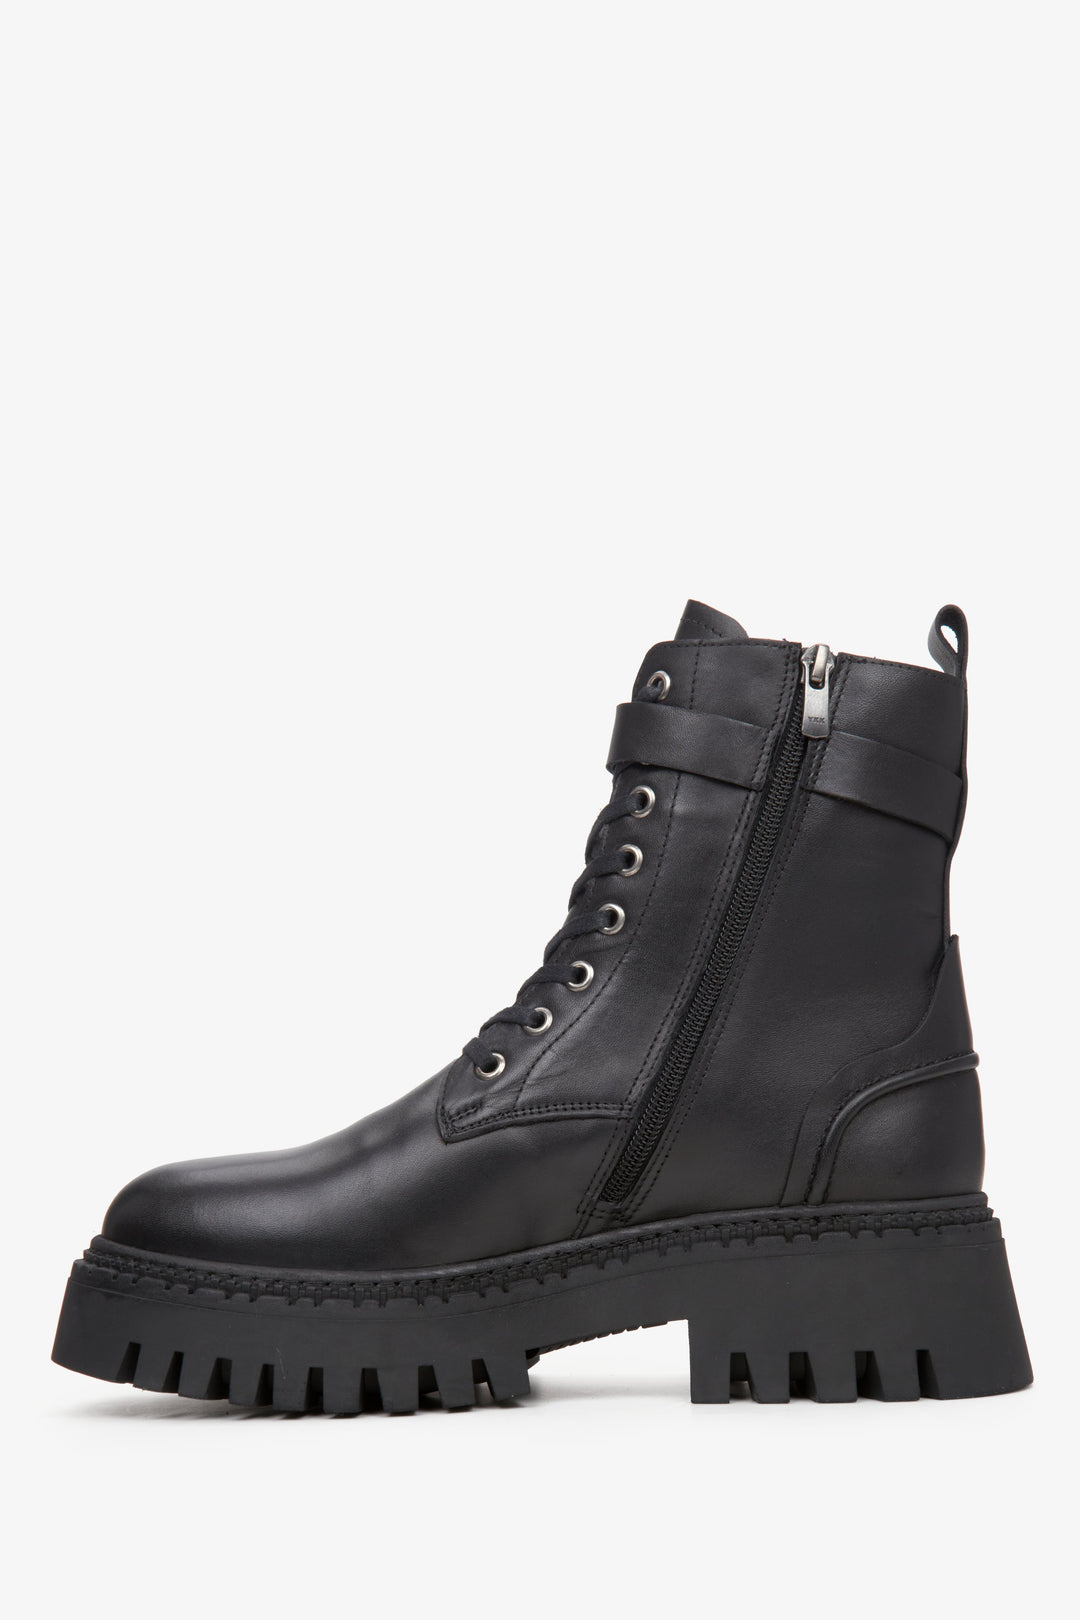 Women's black ankle boots made of genuine leather - side profile of the shoe.